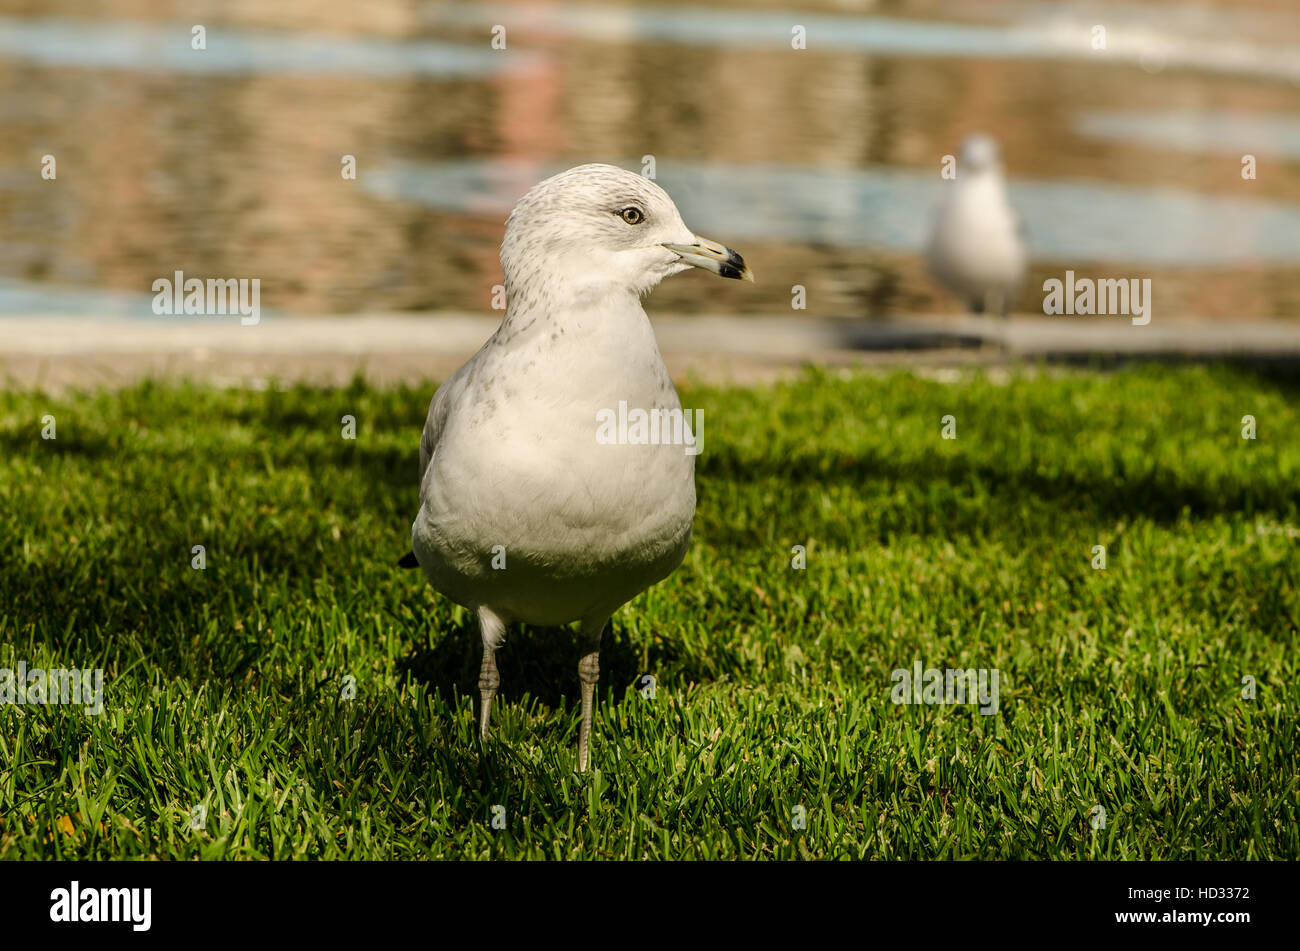 Seagull standing on the grass in front of a pond Stock Photo